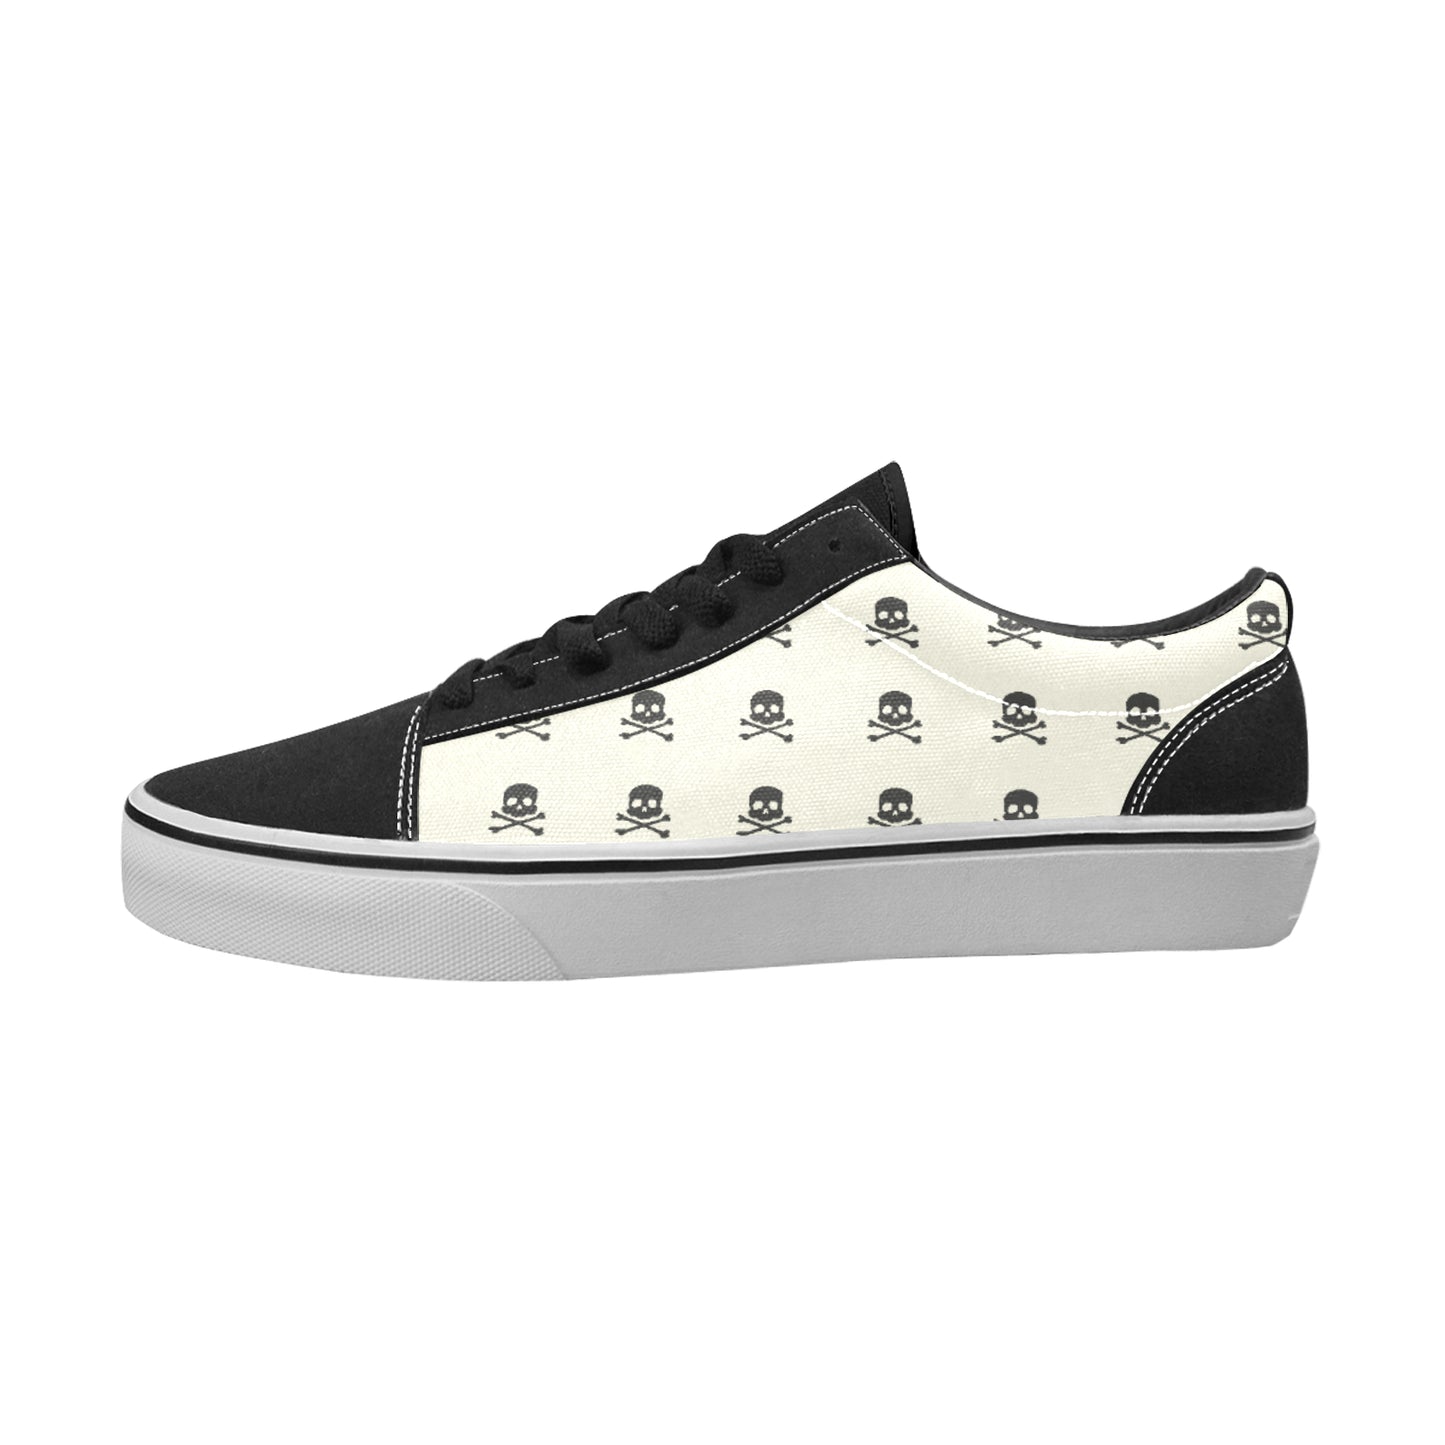 Skull Array Women's Lace-Up Canvas Shoes